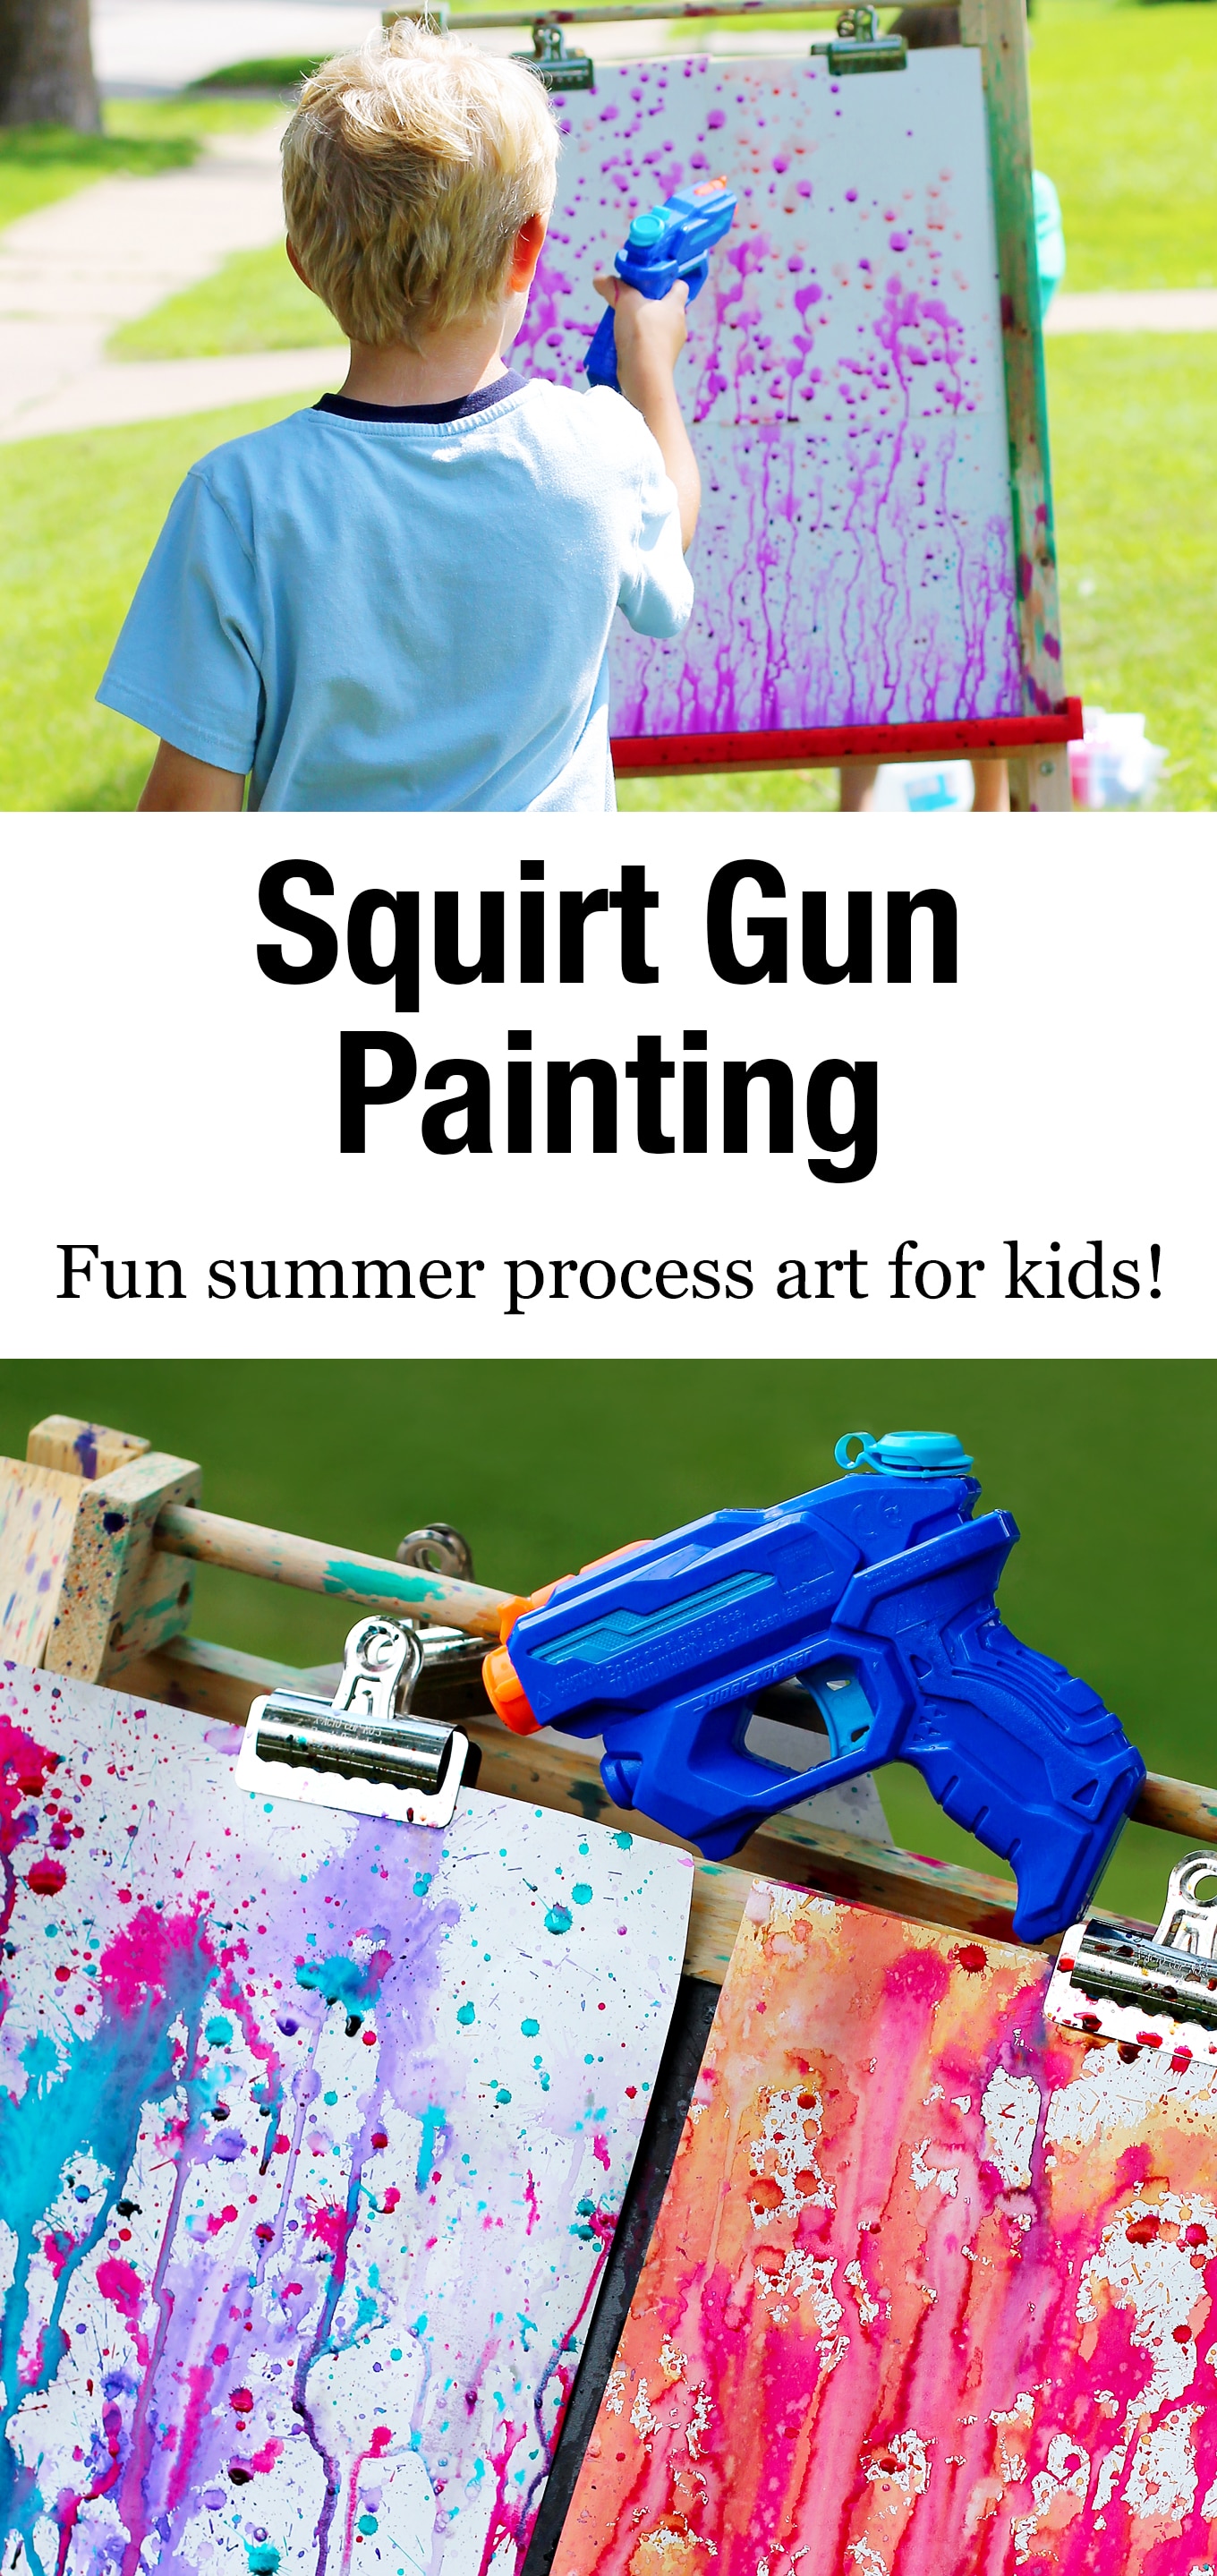 Bust summer boredom at home, school, or camp with Squirt Gun Painting, an amazing art experience for kids of all ages. #squirtgunpainting #squirtpainting #summerart #summerartforkids #summercrafts #watercolorart #kidsart #squirtgunpainting #watergunpainting #summer #kidscrafts via @firefliesandmudpies